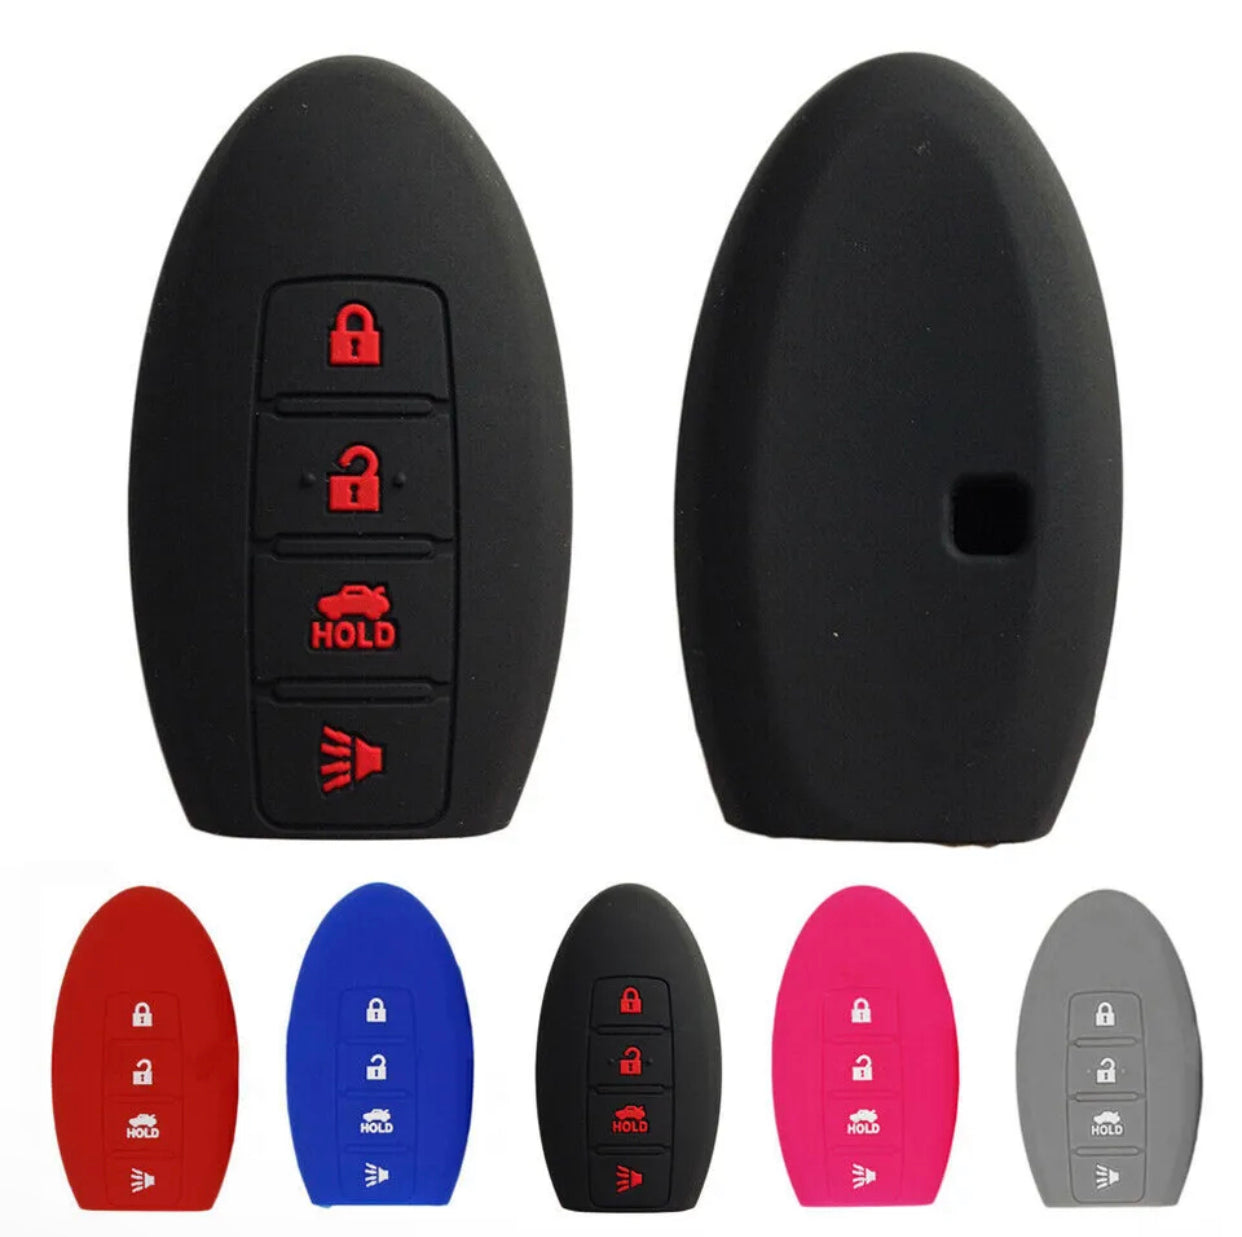 Silicone Soft Remote Car Key Fob Cover Case Shell Holder For Infiniti G35 G37